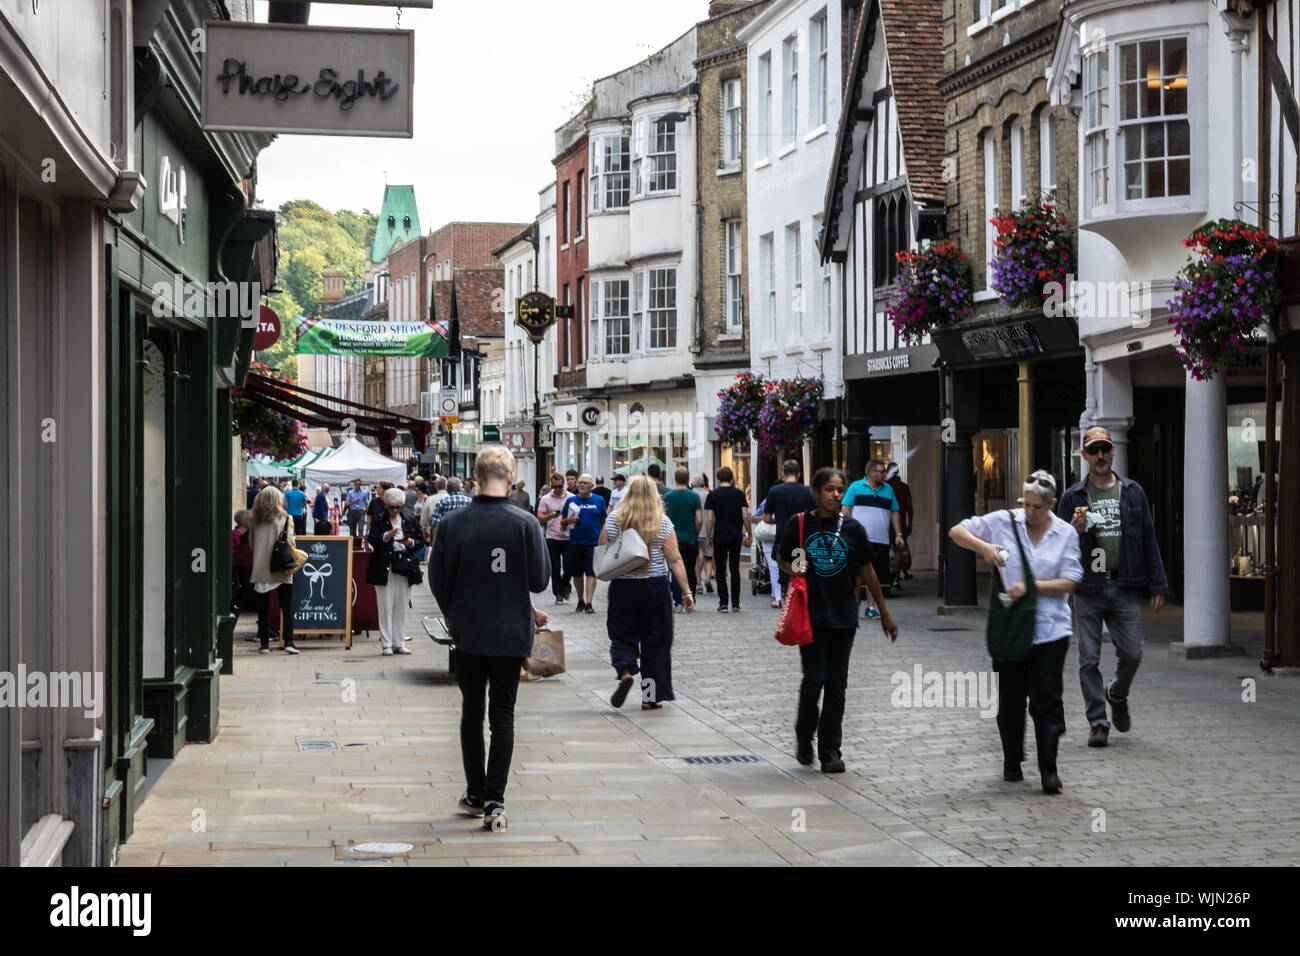 Winchester, Hampshire, UK Shoppers walking through Winchester High street passed various shops on a busy day for consumers Stock Photo